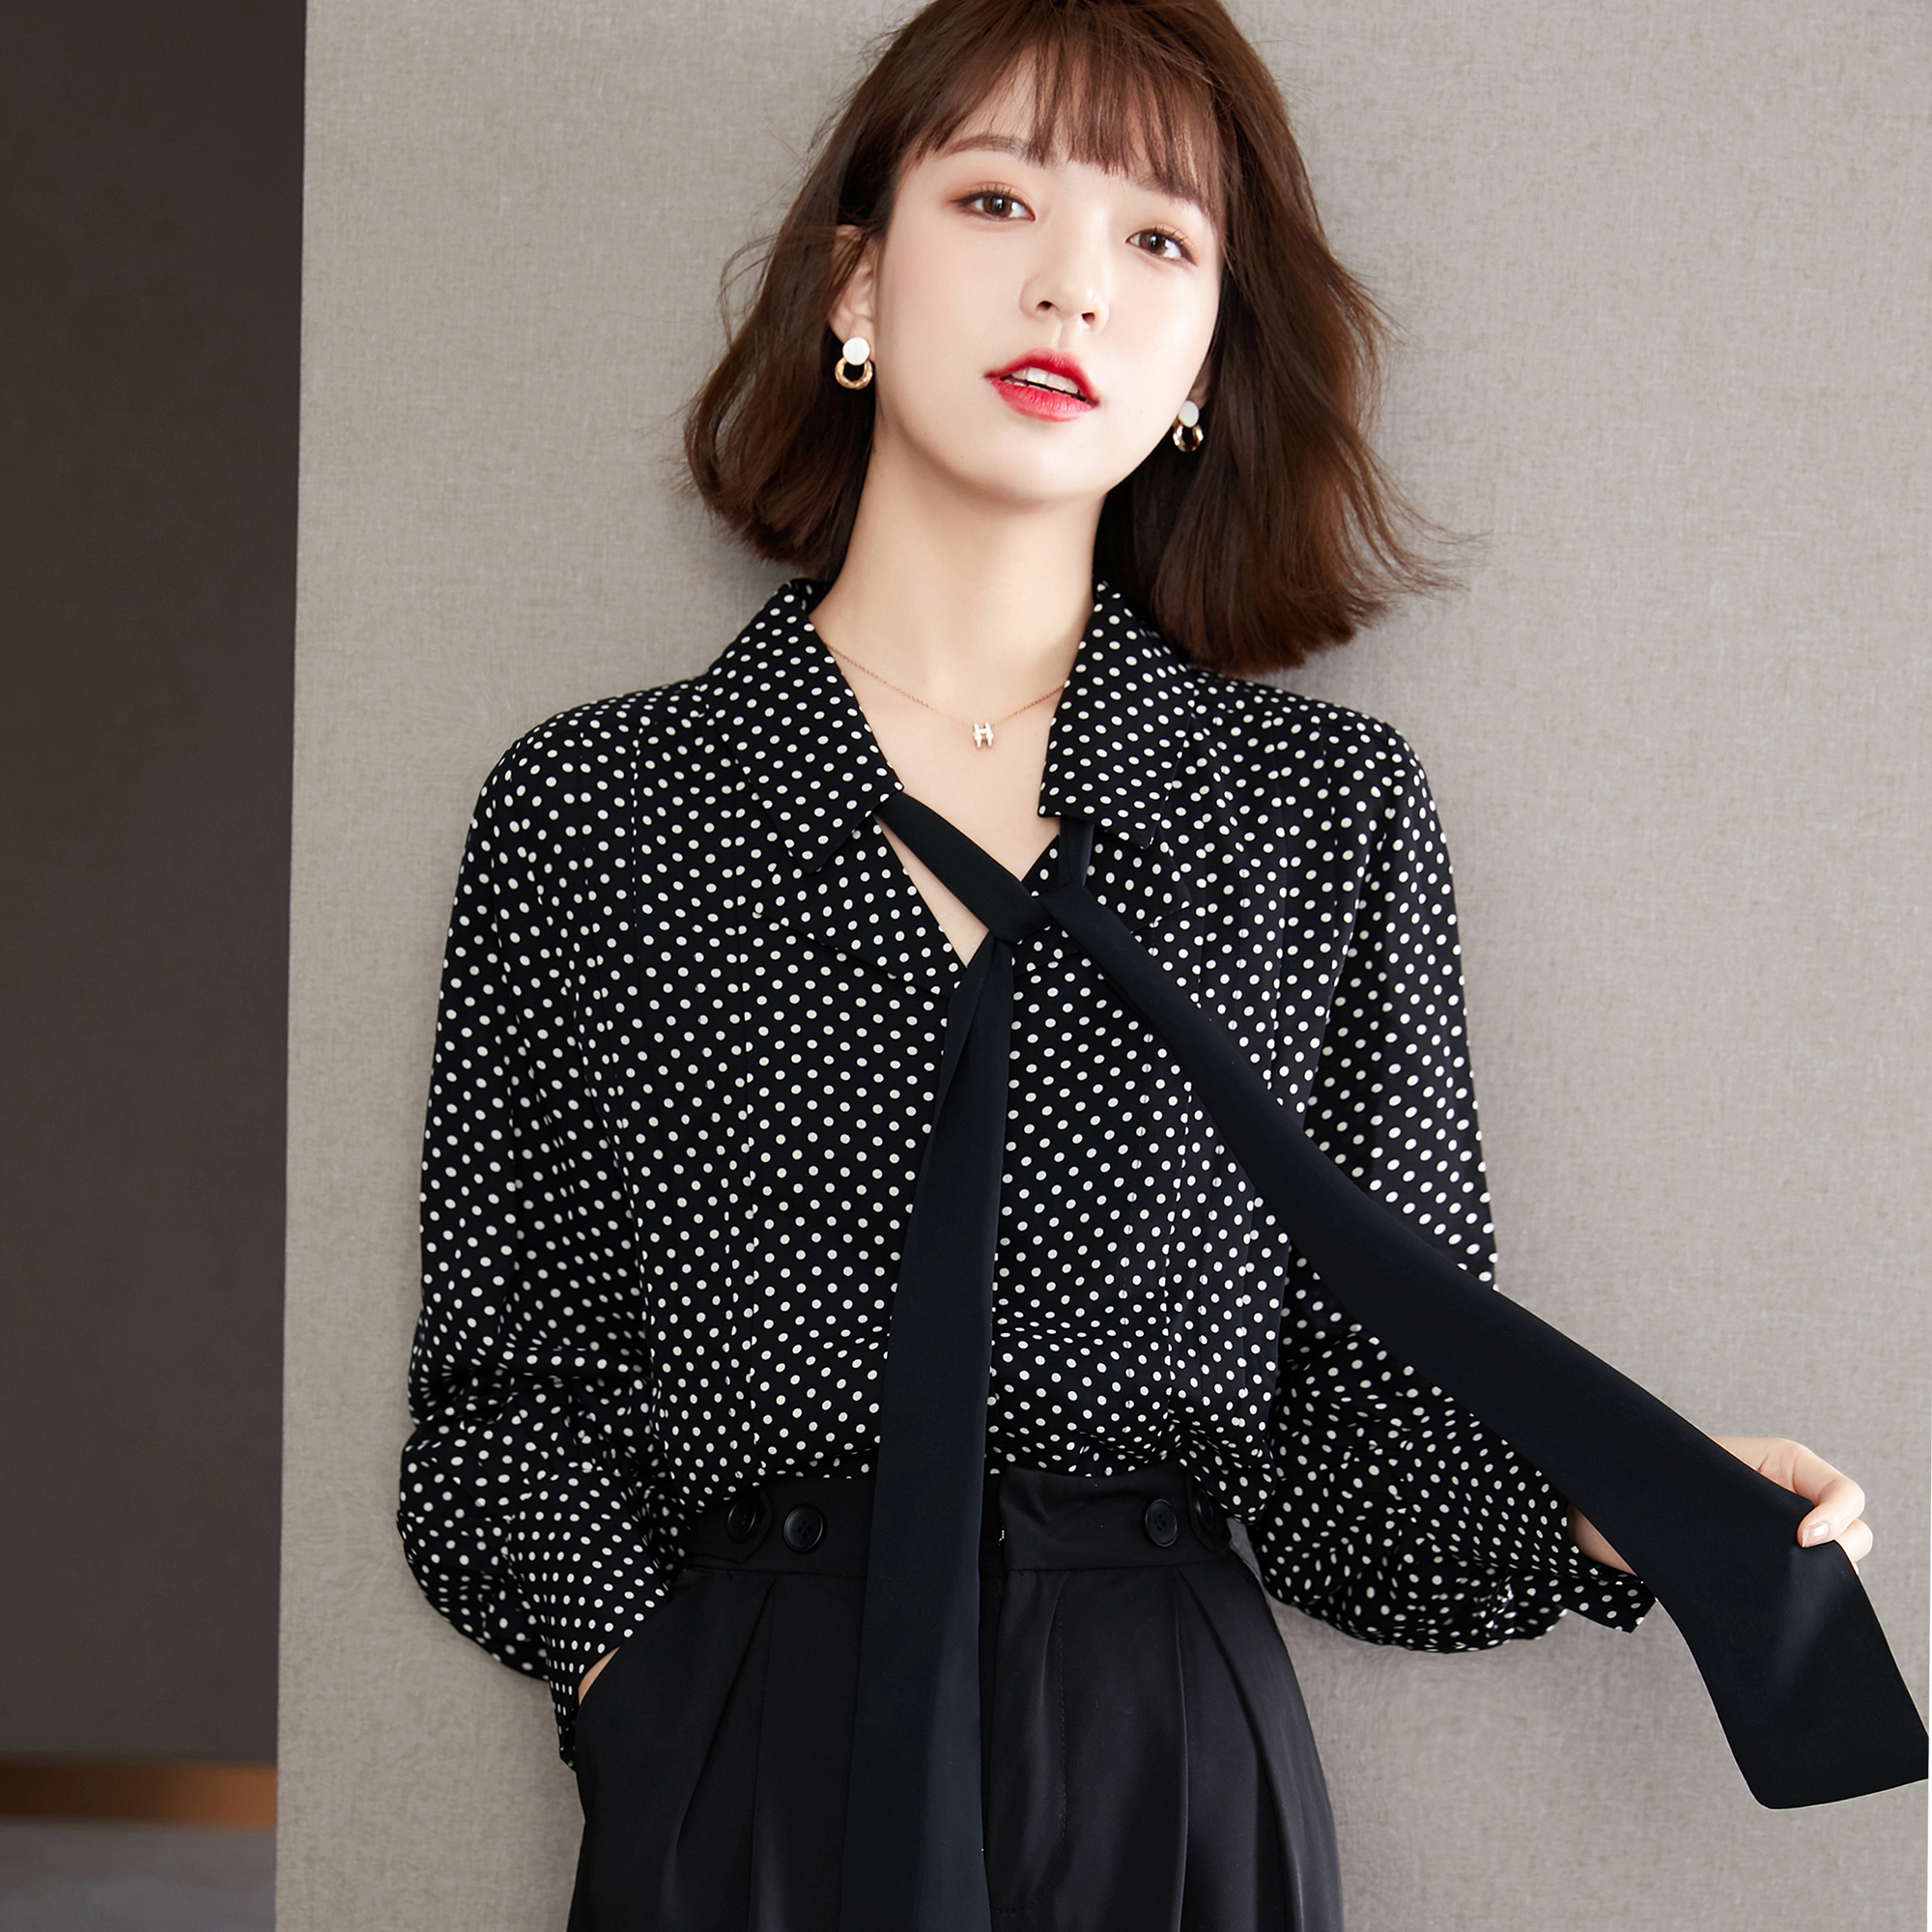 Year 2021 small spring temperament Veel Shuiyubo Dots Women's long-sleeved bow tie shirt